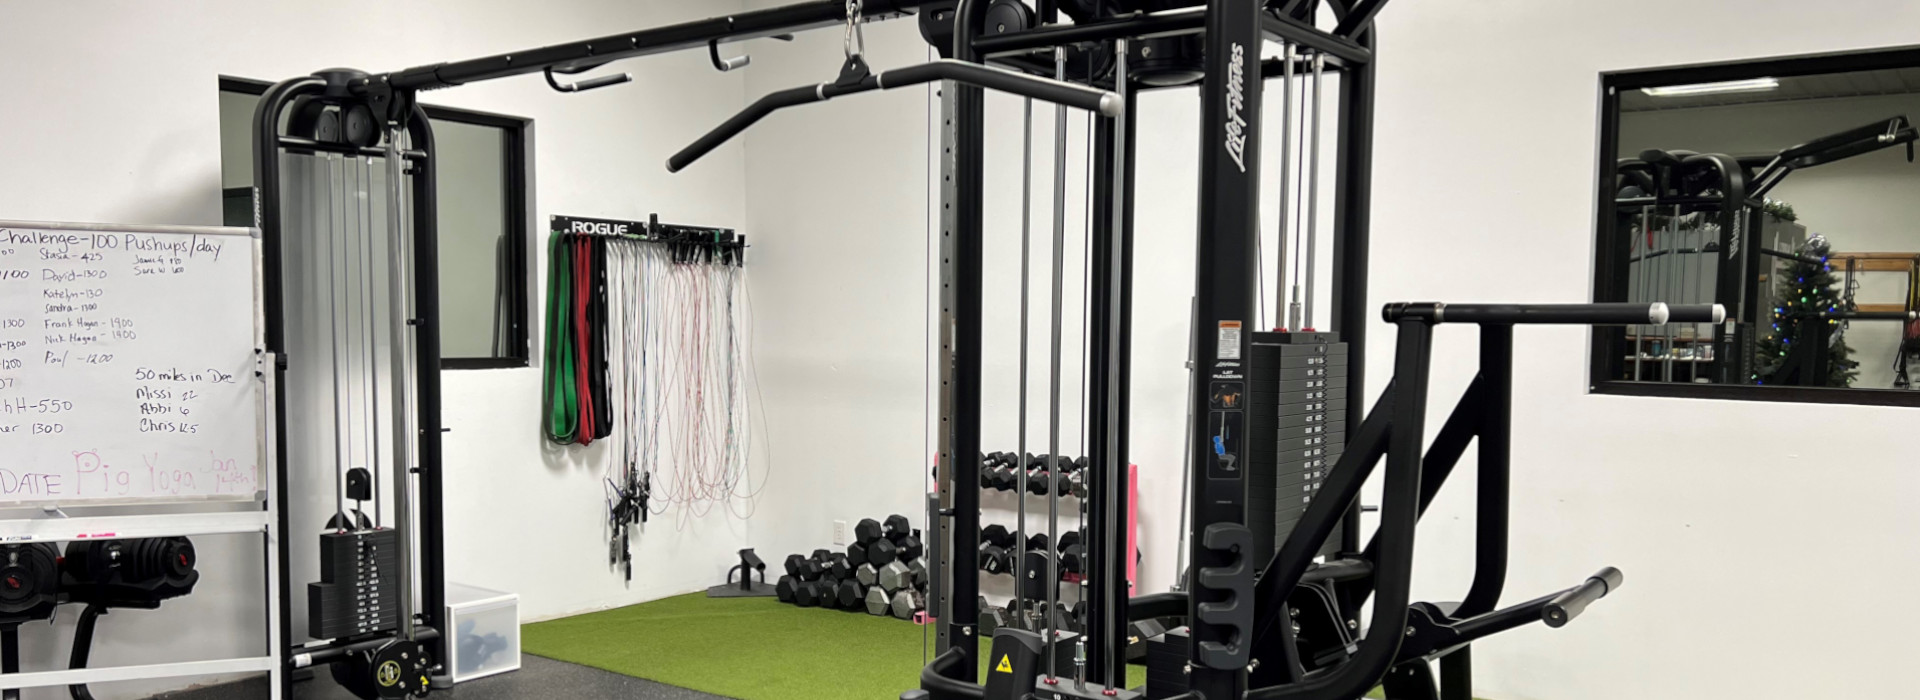 Why Barbell Fitness Club Is Ranked One of The Best Gyms In Pittsboro